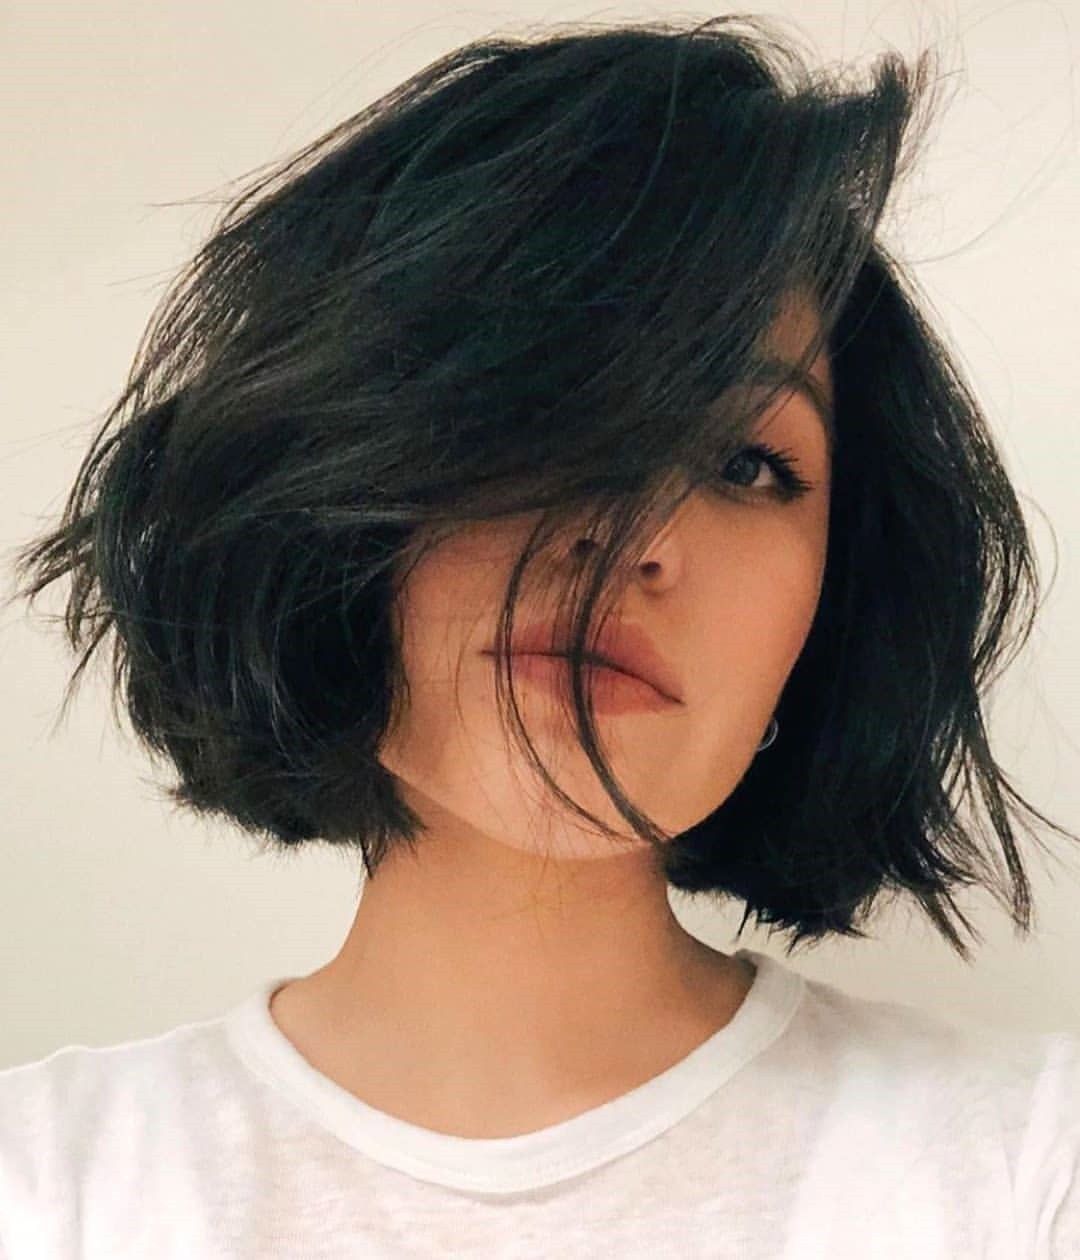 100+ Most Edgy Short Hairstyles for Women 2020 -   11 edgy hair 2019 ideas